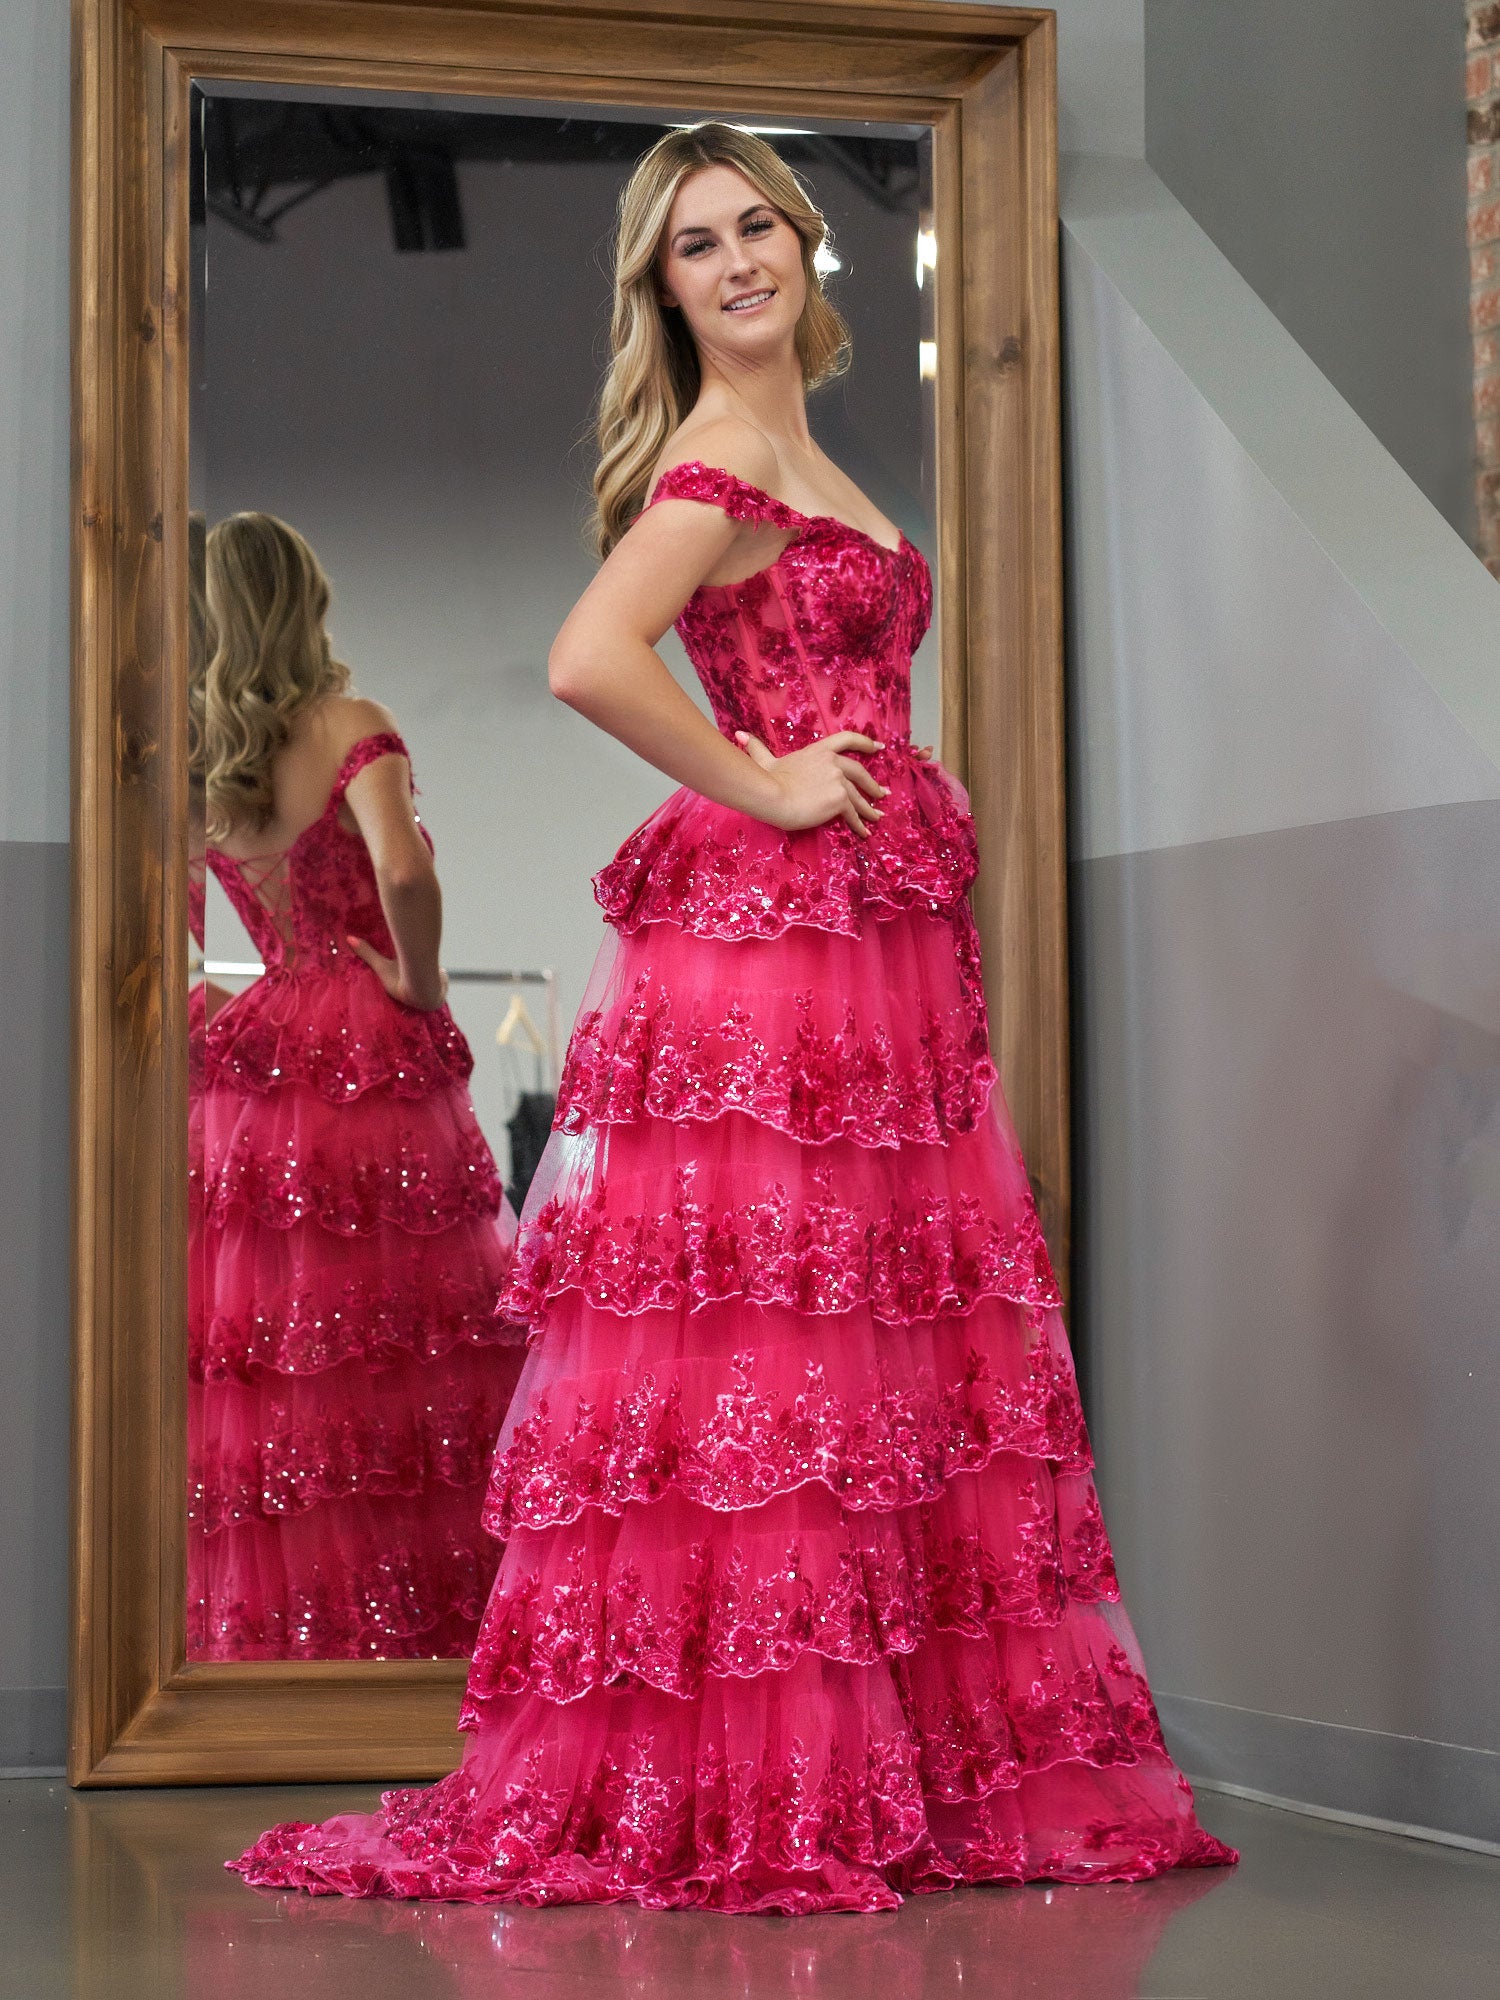 Fuchsia Princess A Line Off the Shoulder Corset Prom Dress with Lace Ruffles